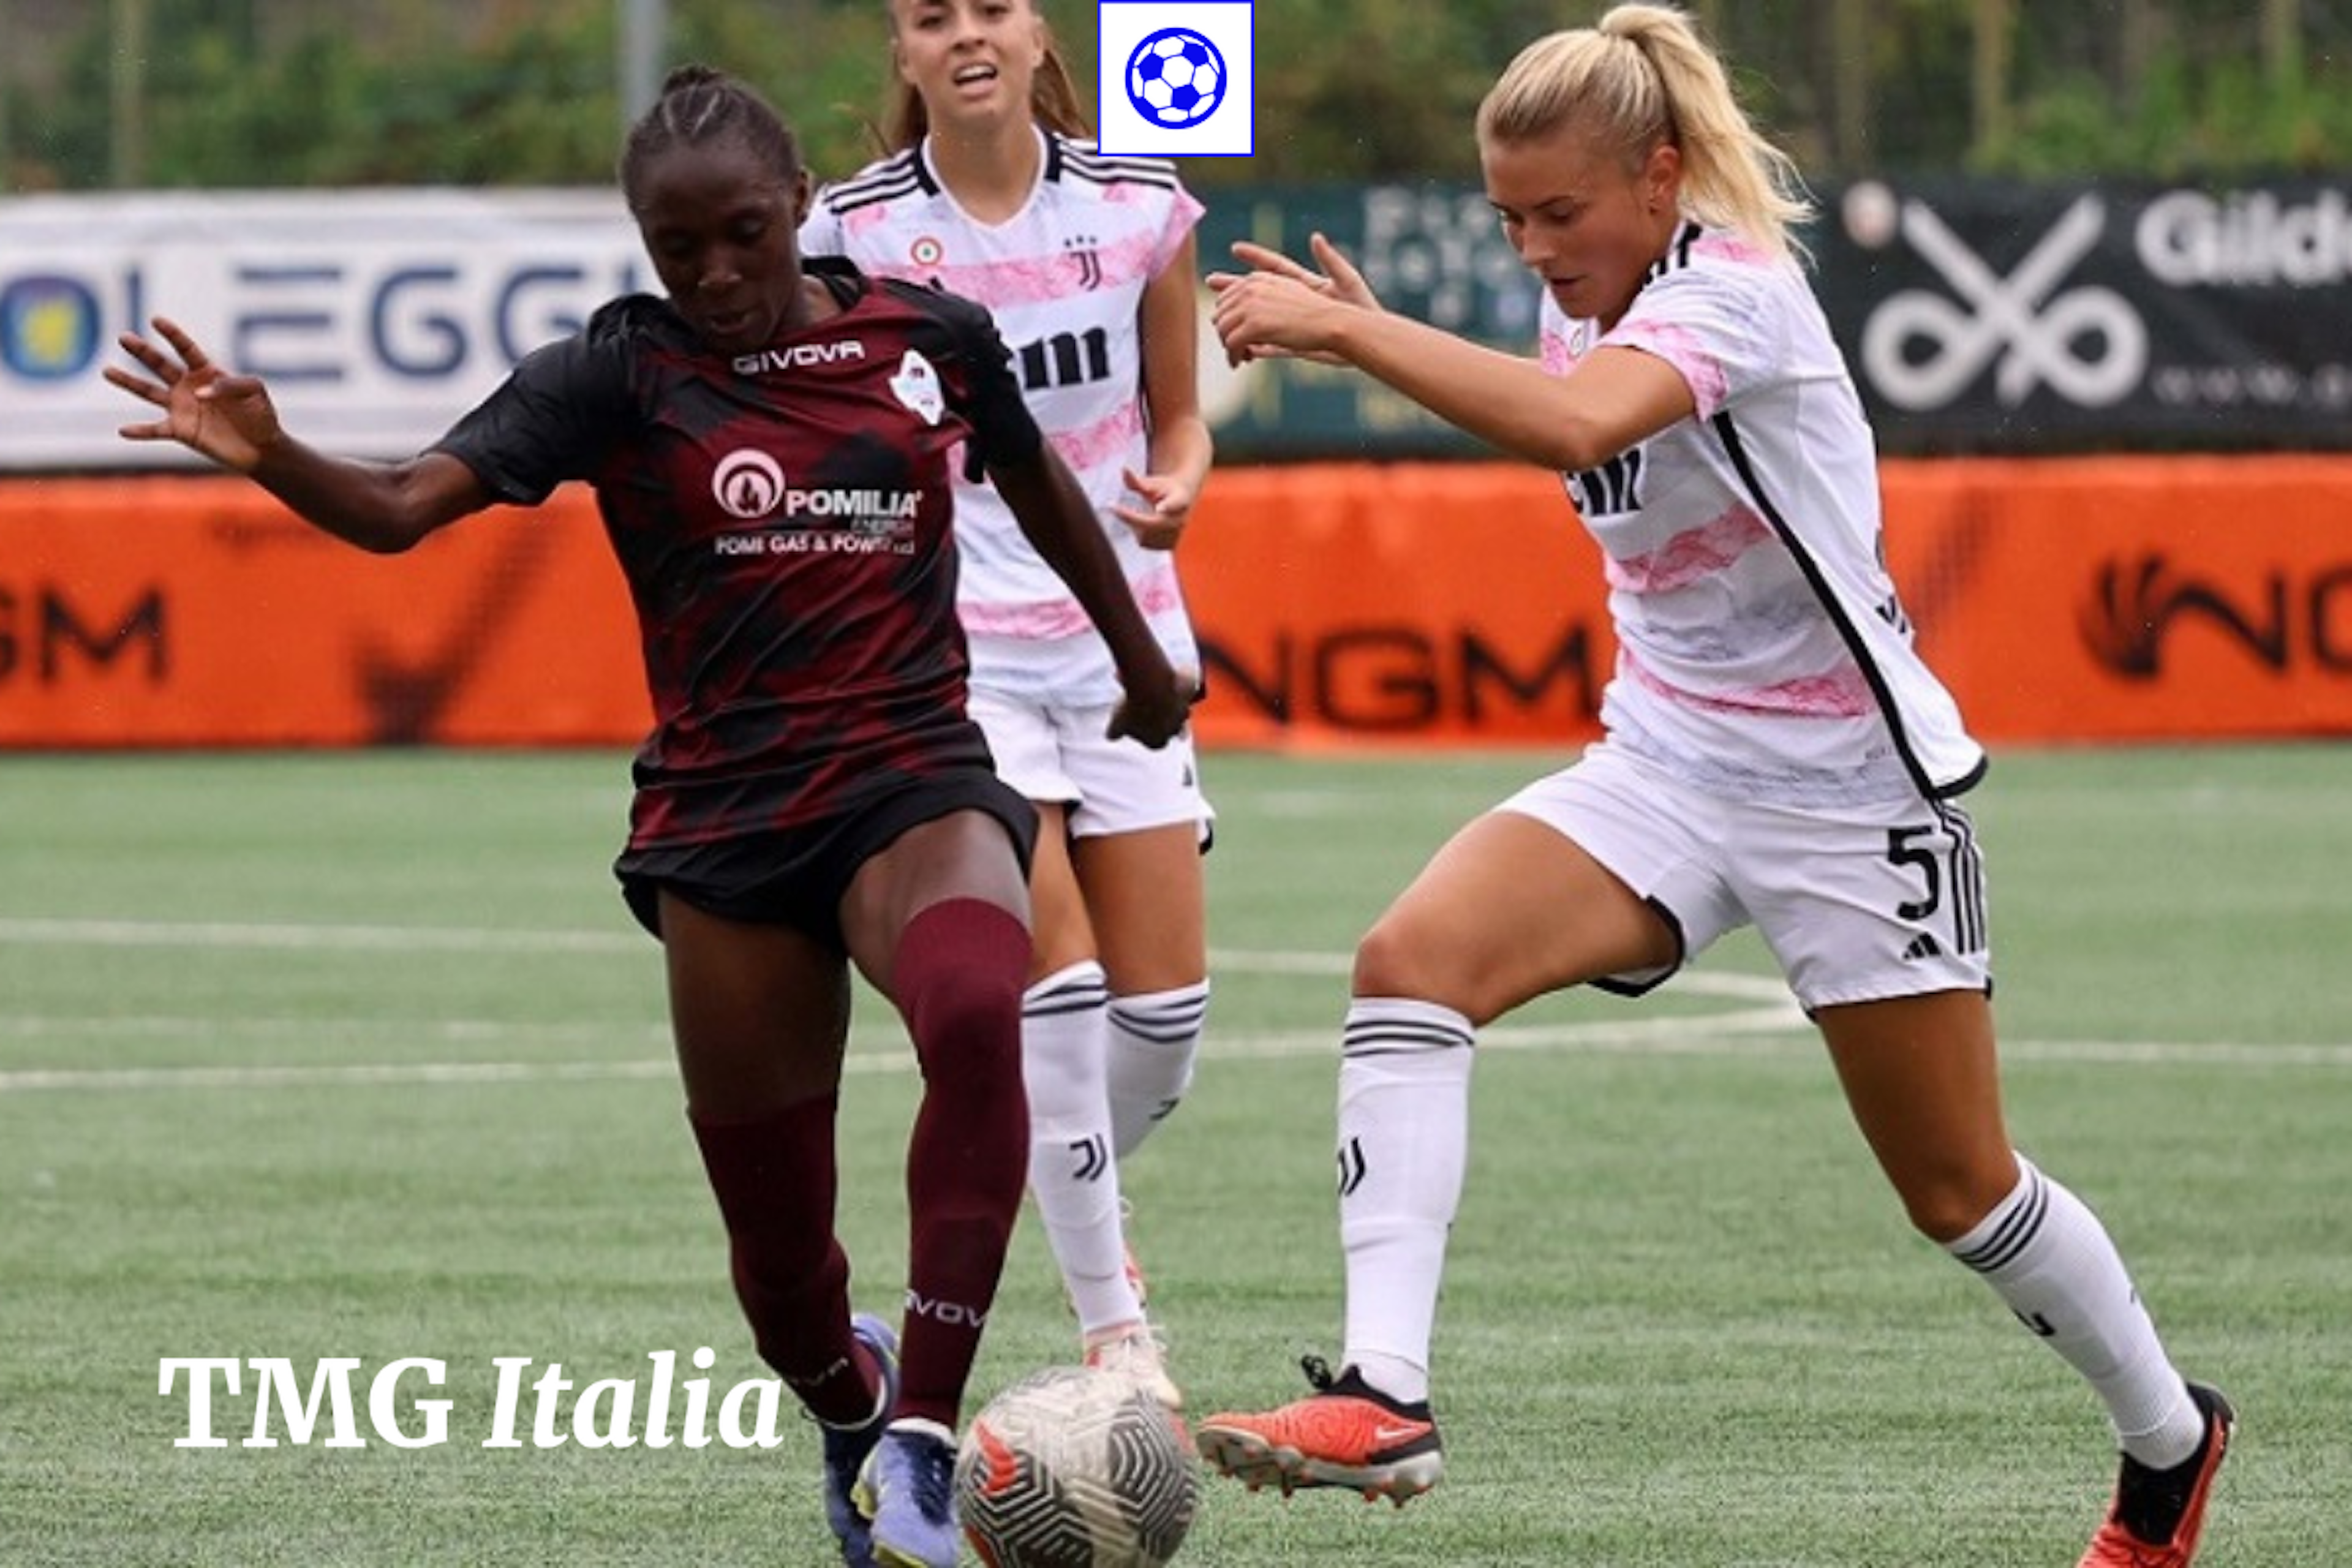 Cover Image for Women's Football in Italy: A Challenging Evolution